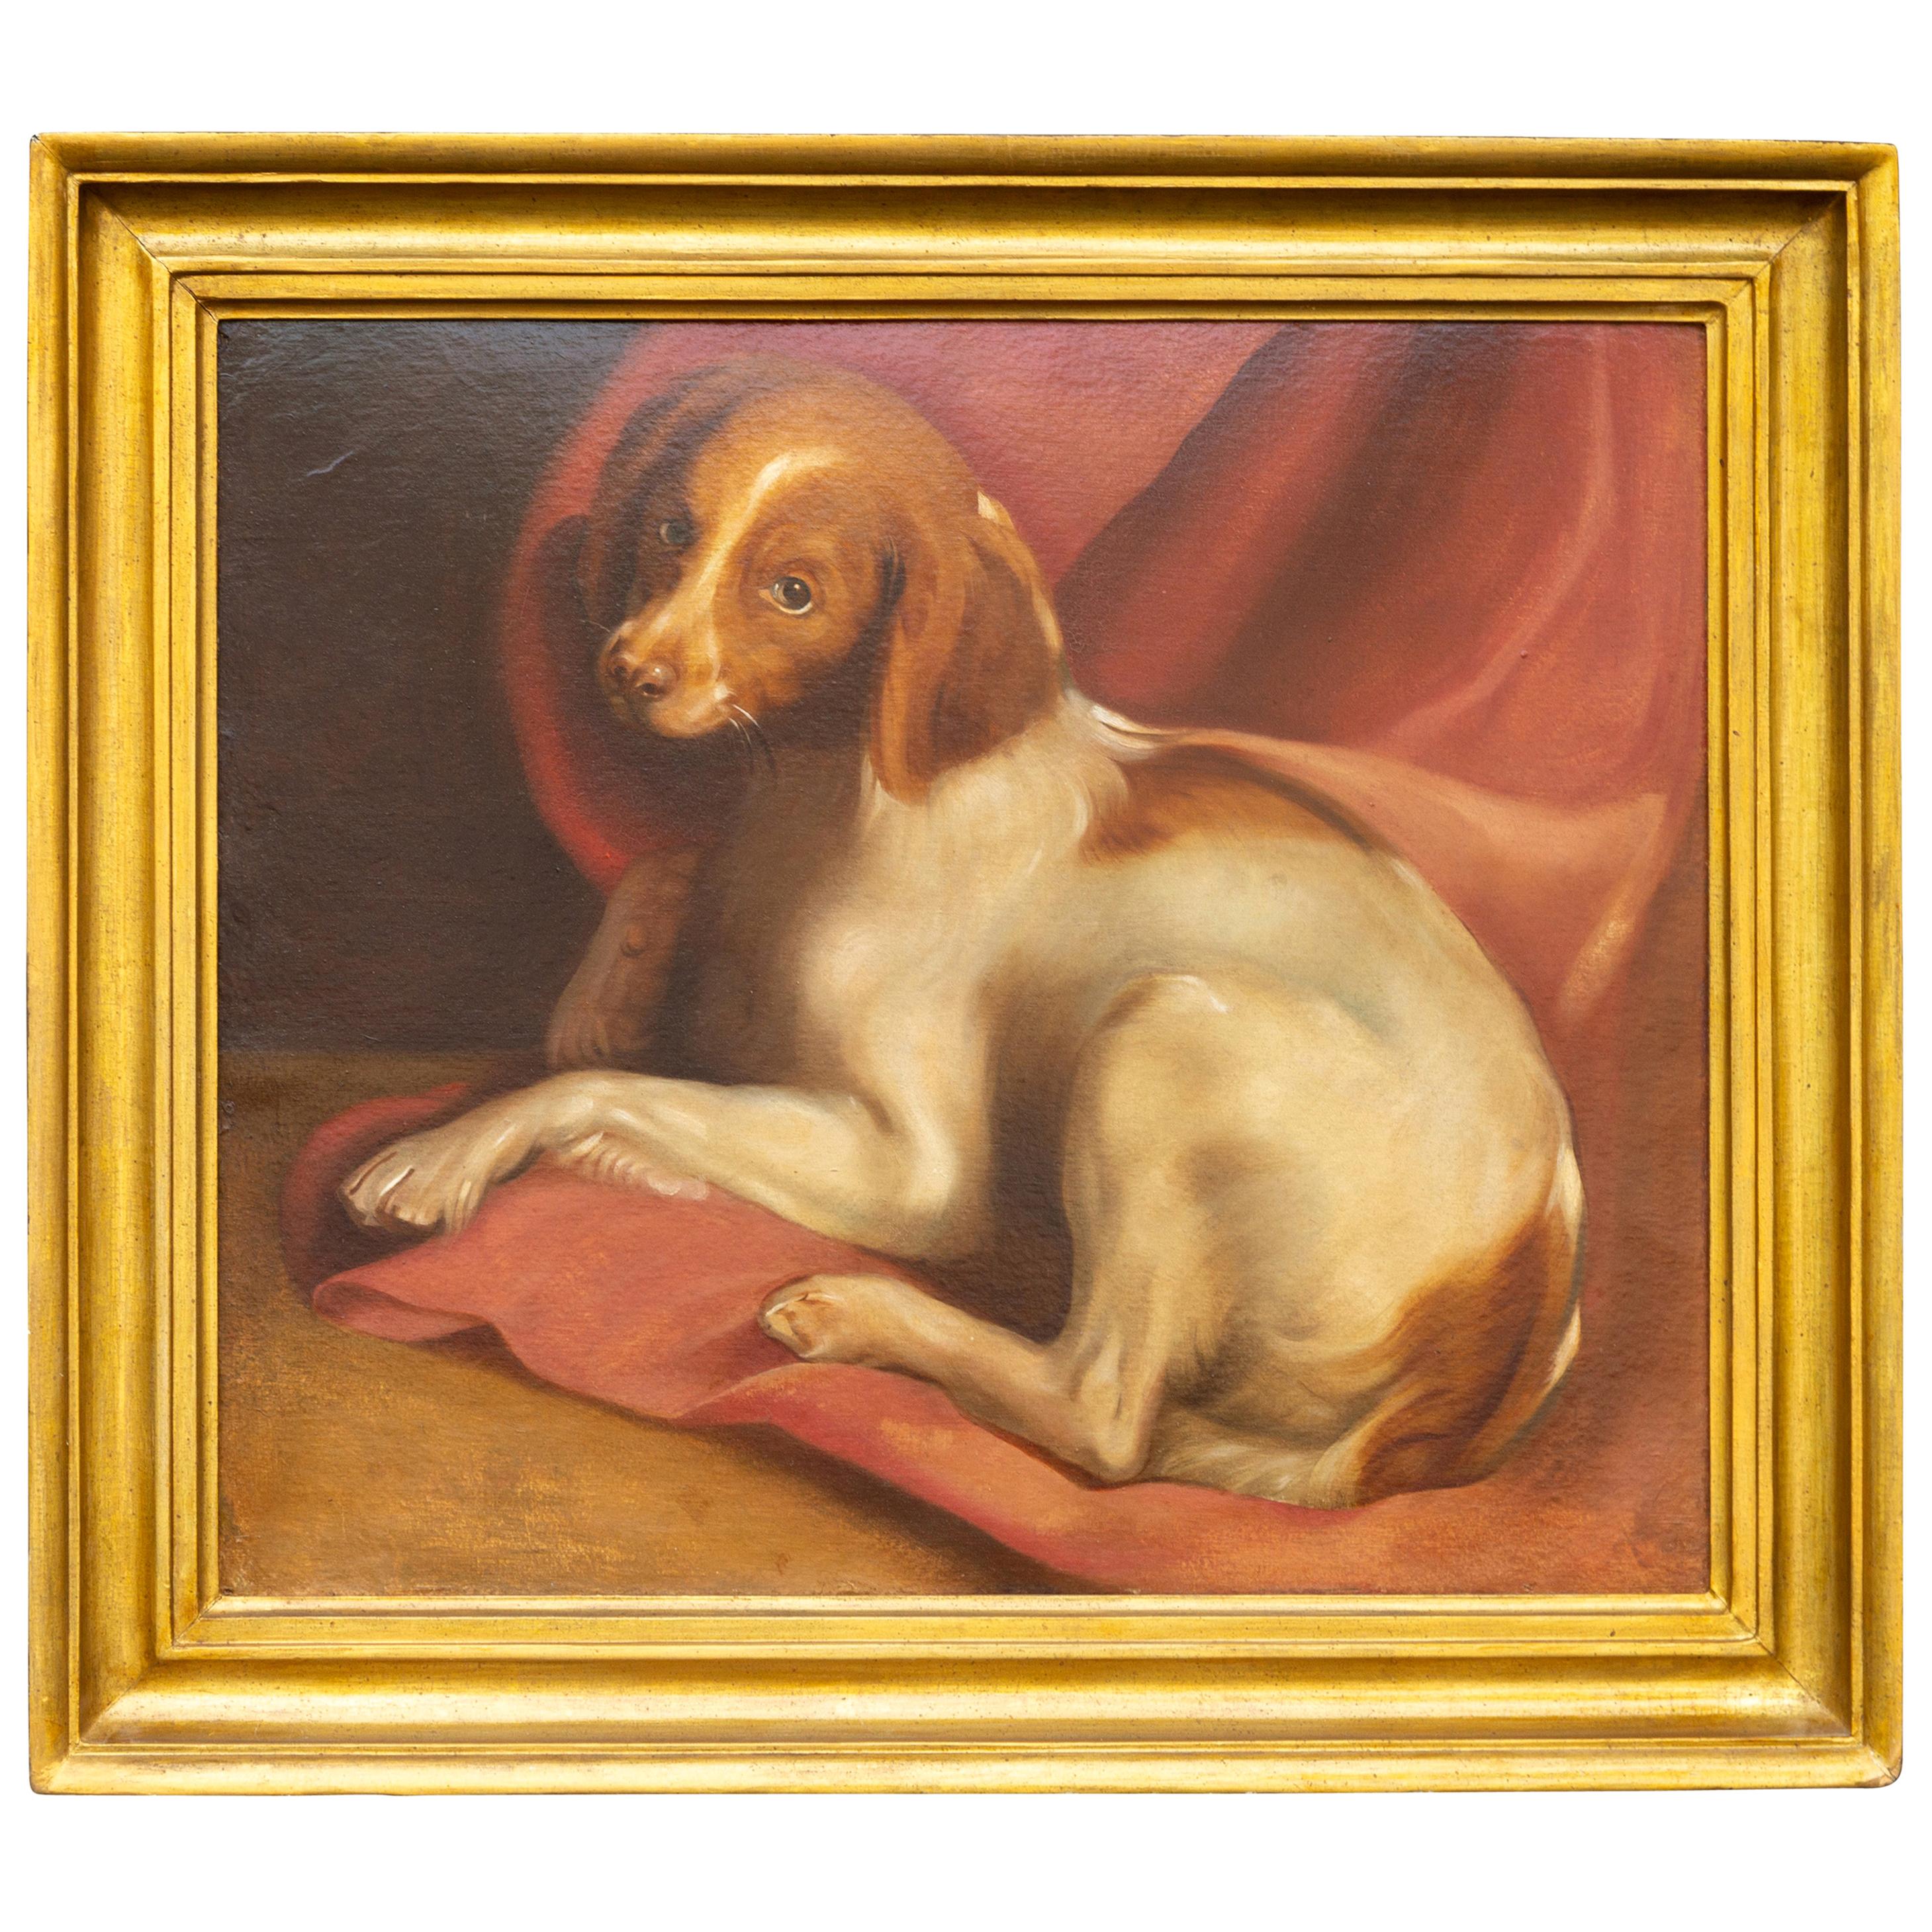 American 1890s Framed Oil on Board Painting Depicting a Dog Lying on a Red Drape For Sale